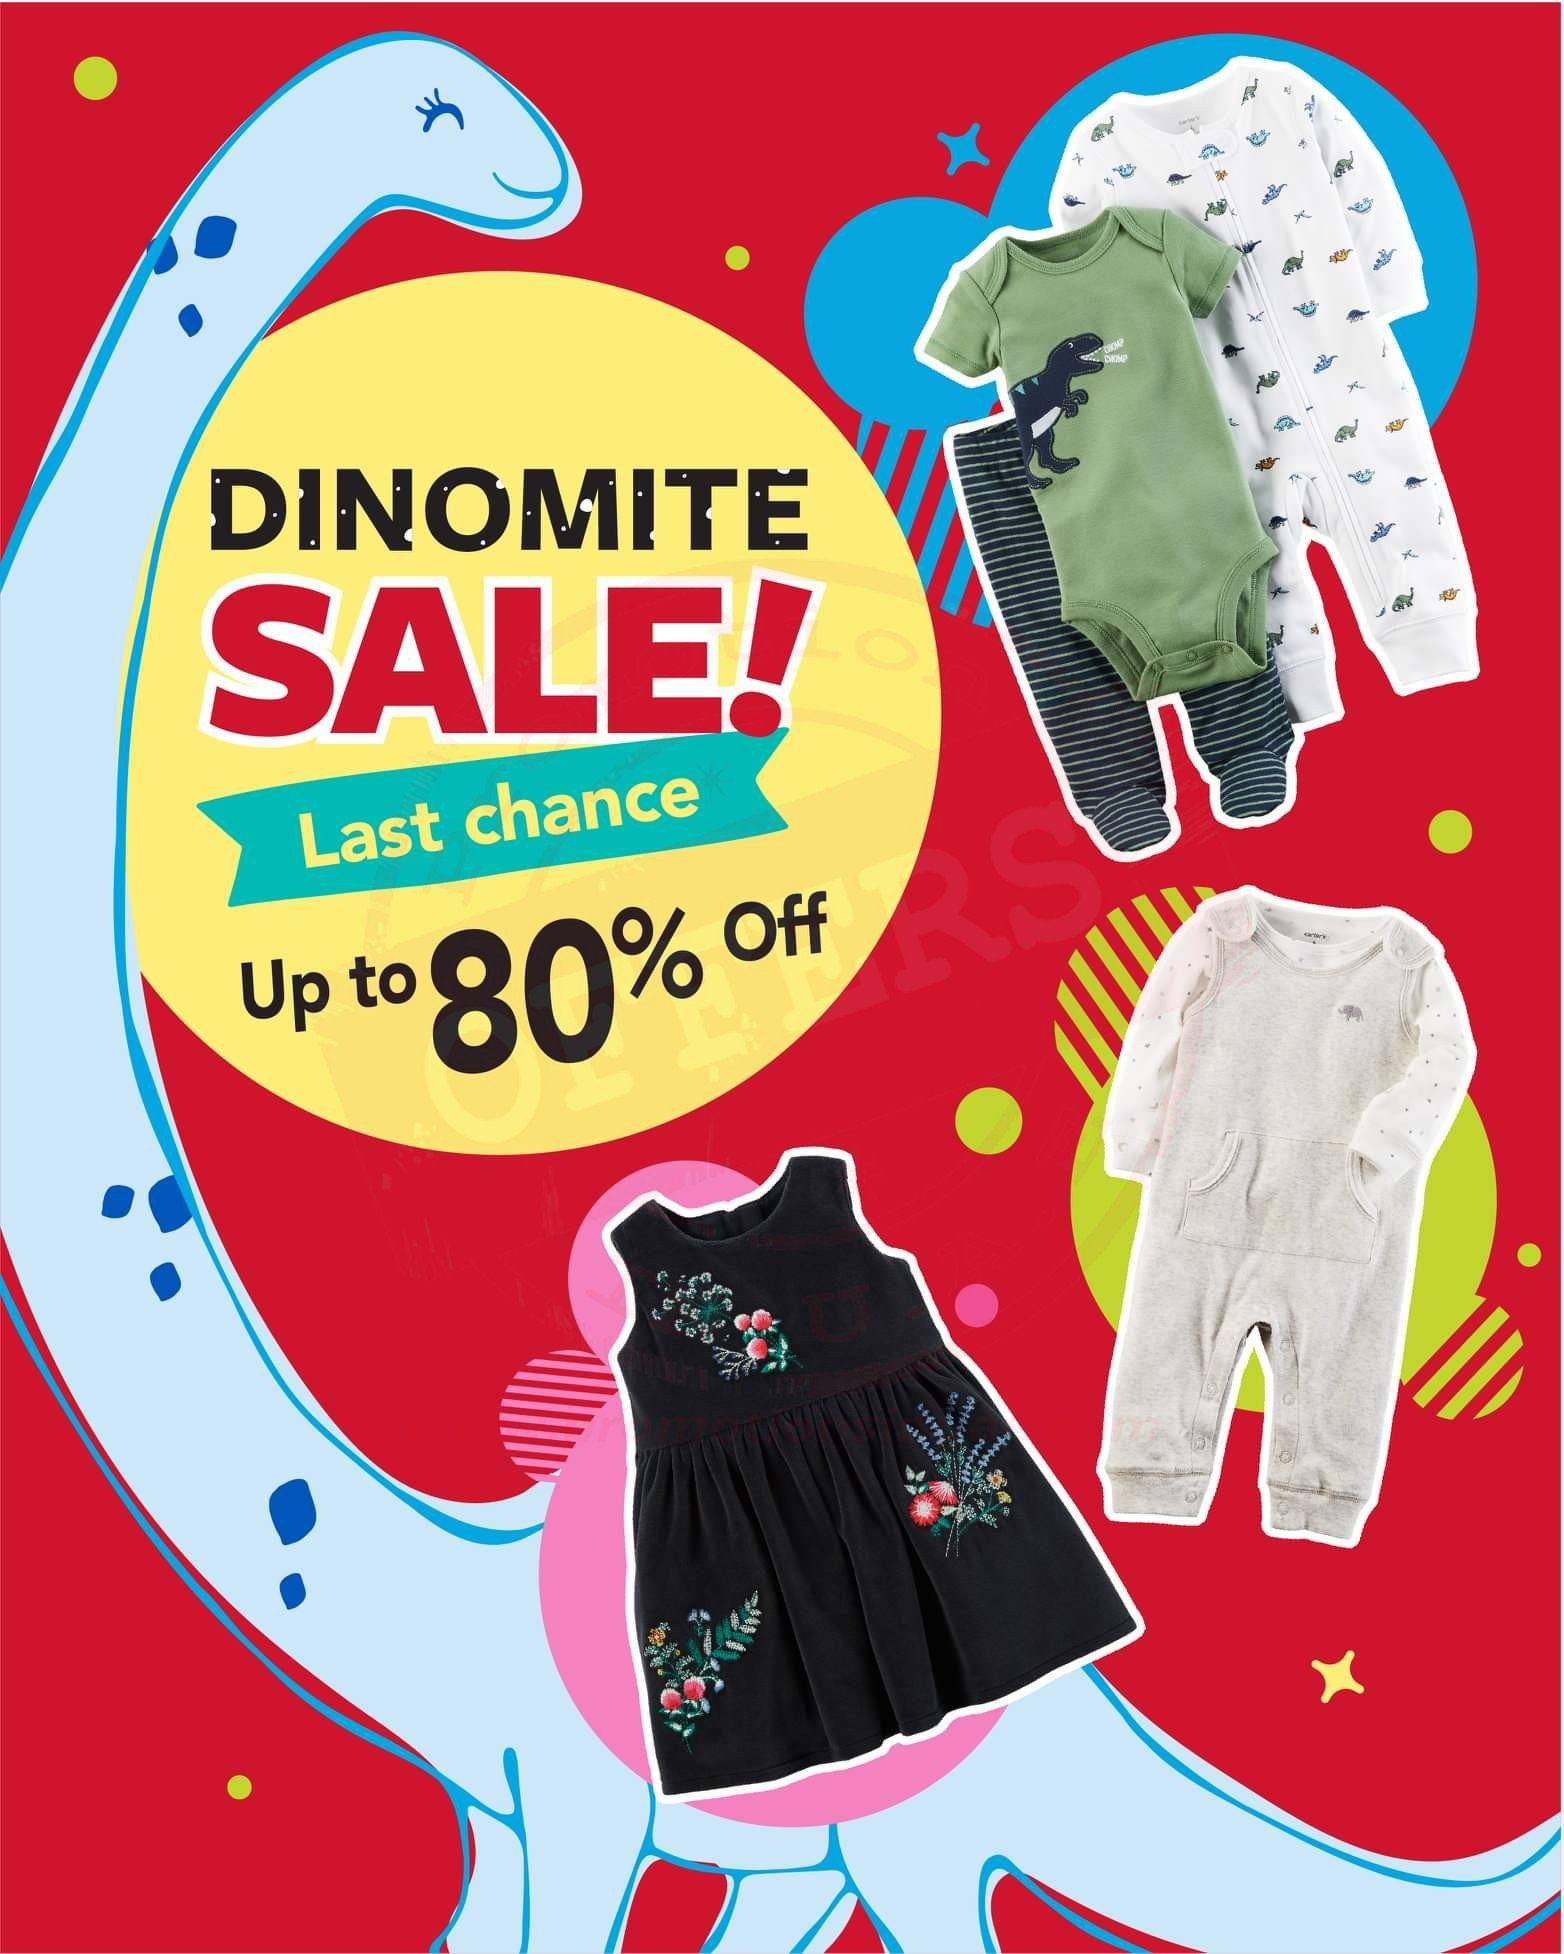 Dinomite Sale upto 80%! Hurry to Carter’s stores